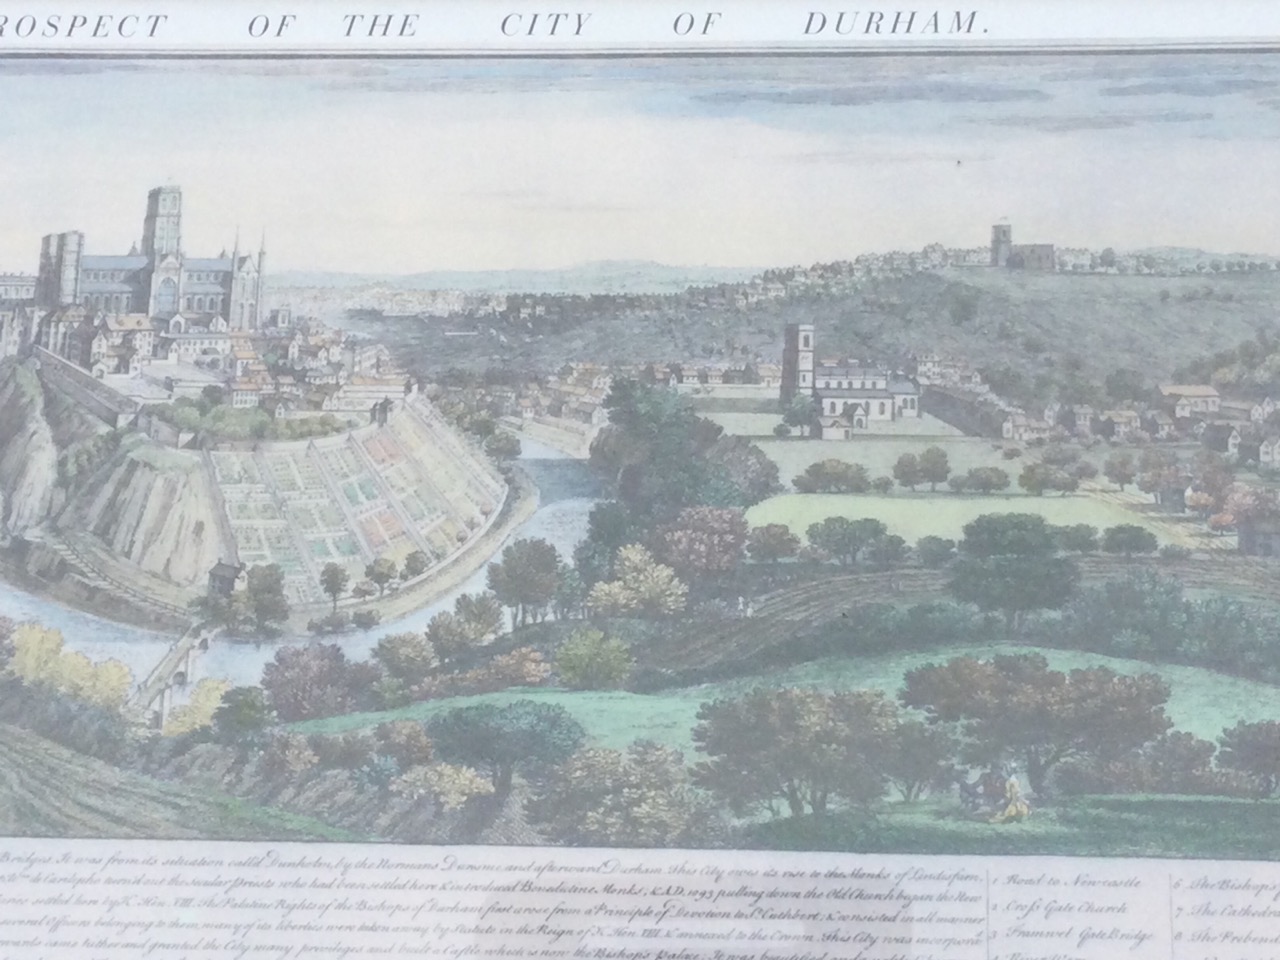 A reproduction landscape print, The South West Prospect of the City of Durham, the coloured plate - Bild 3 aus 3